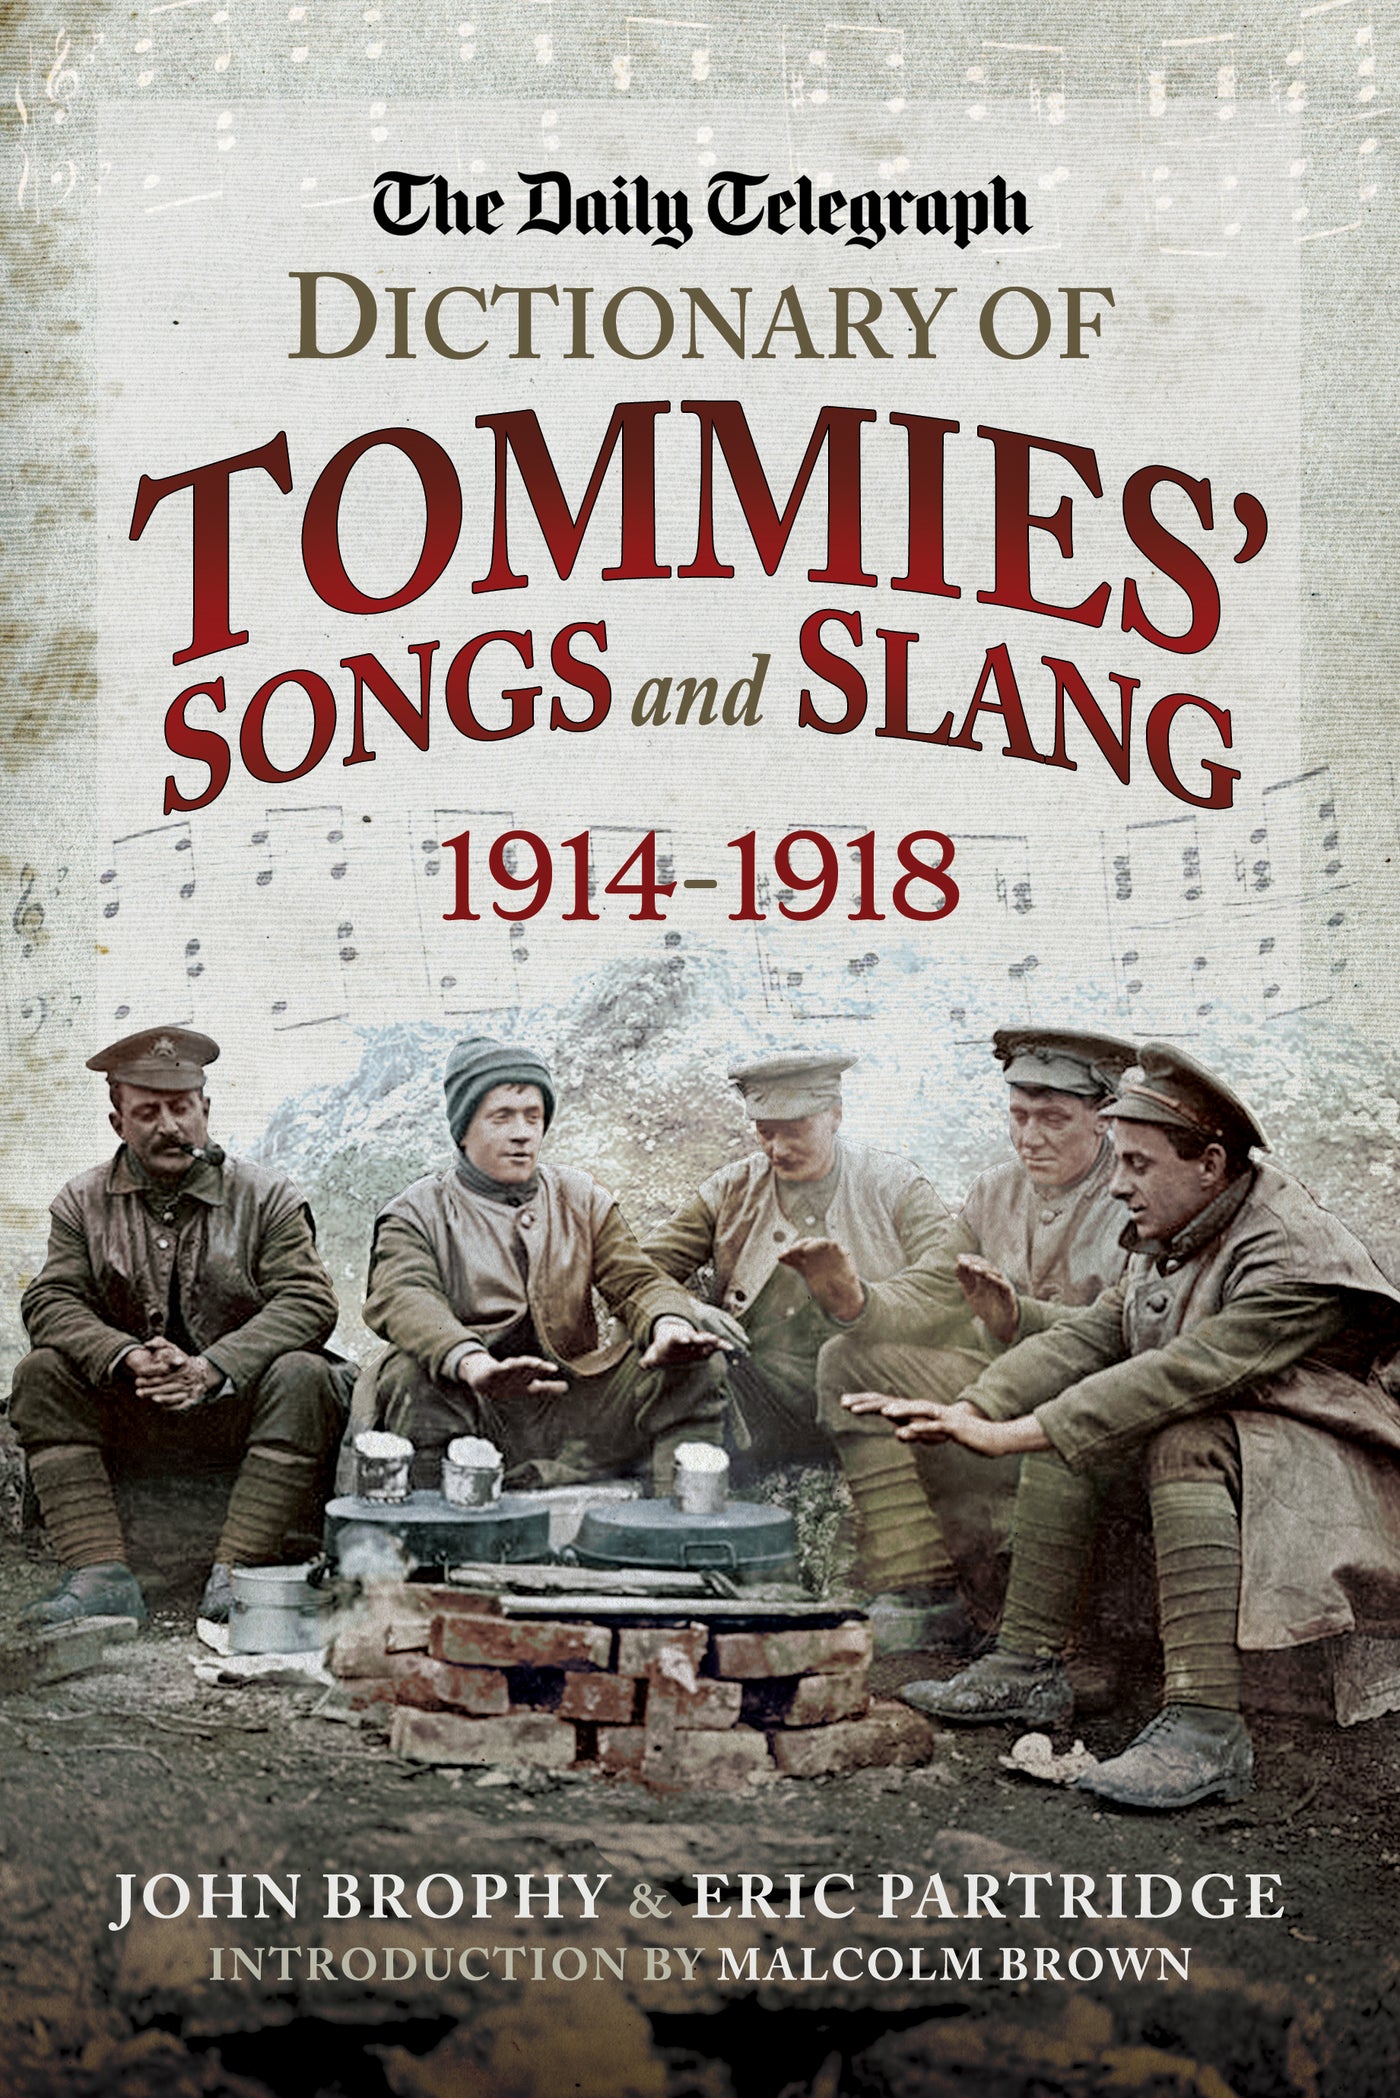 The Daily Telegraph Dictionary of Tommies' Songs and Slang, 1914 - 1918